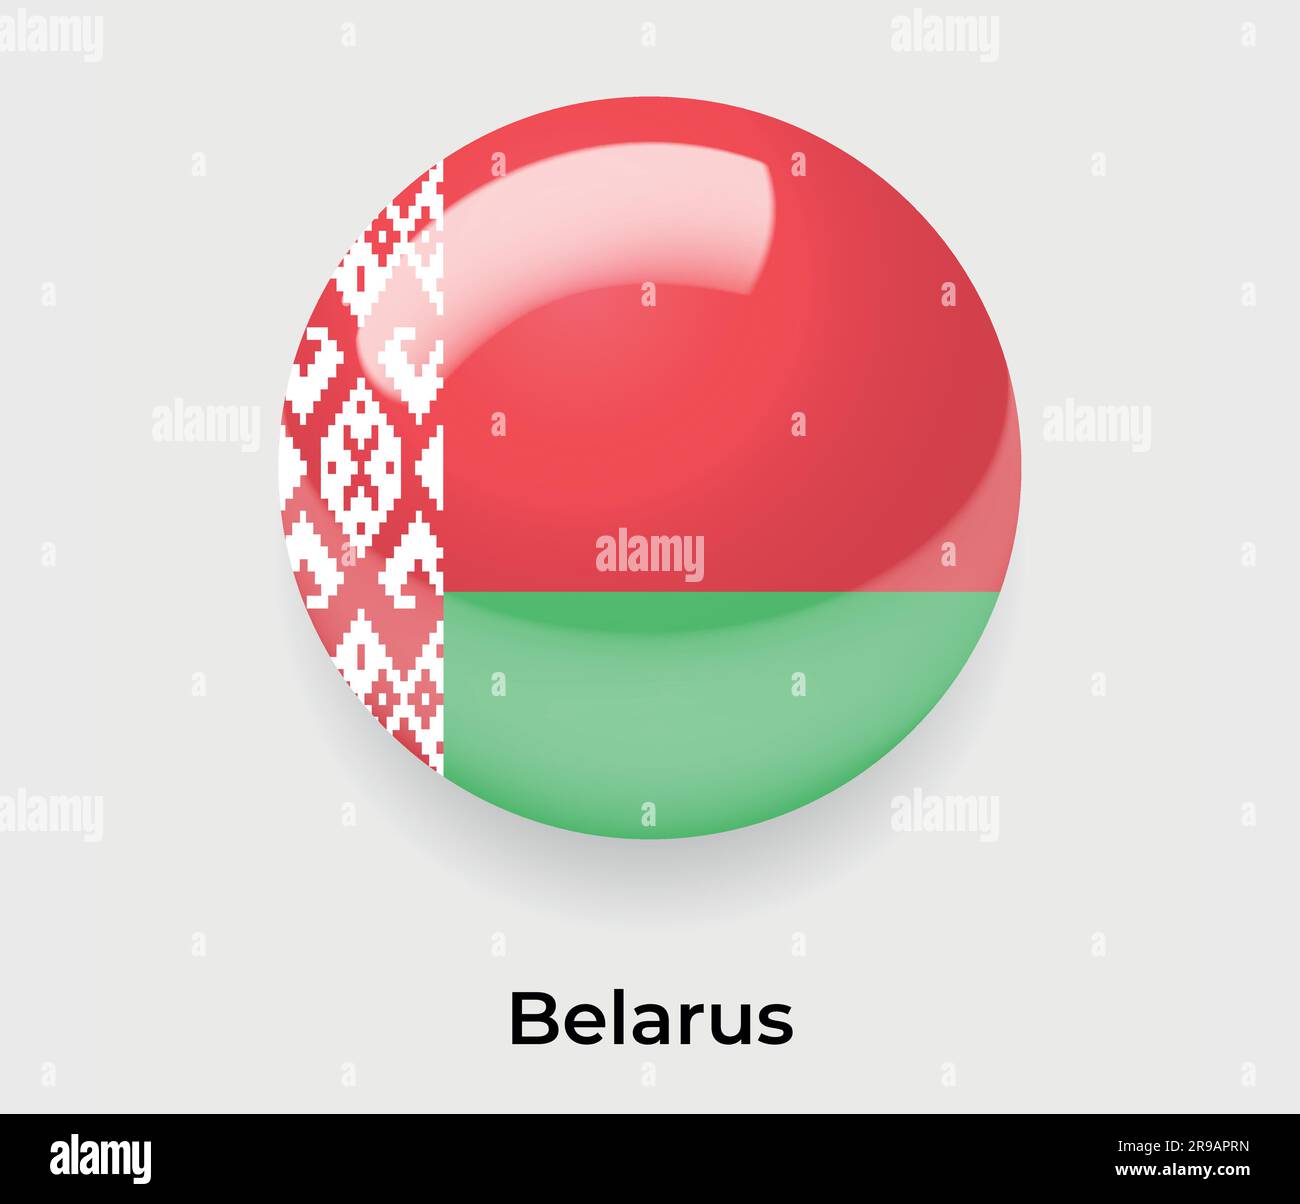 Belarus glossy flag bubble circle round shape icon vector illustration glass Stock Vector